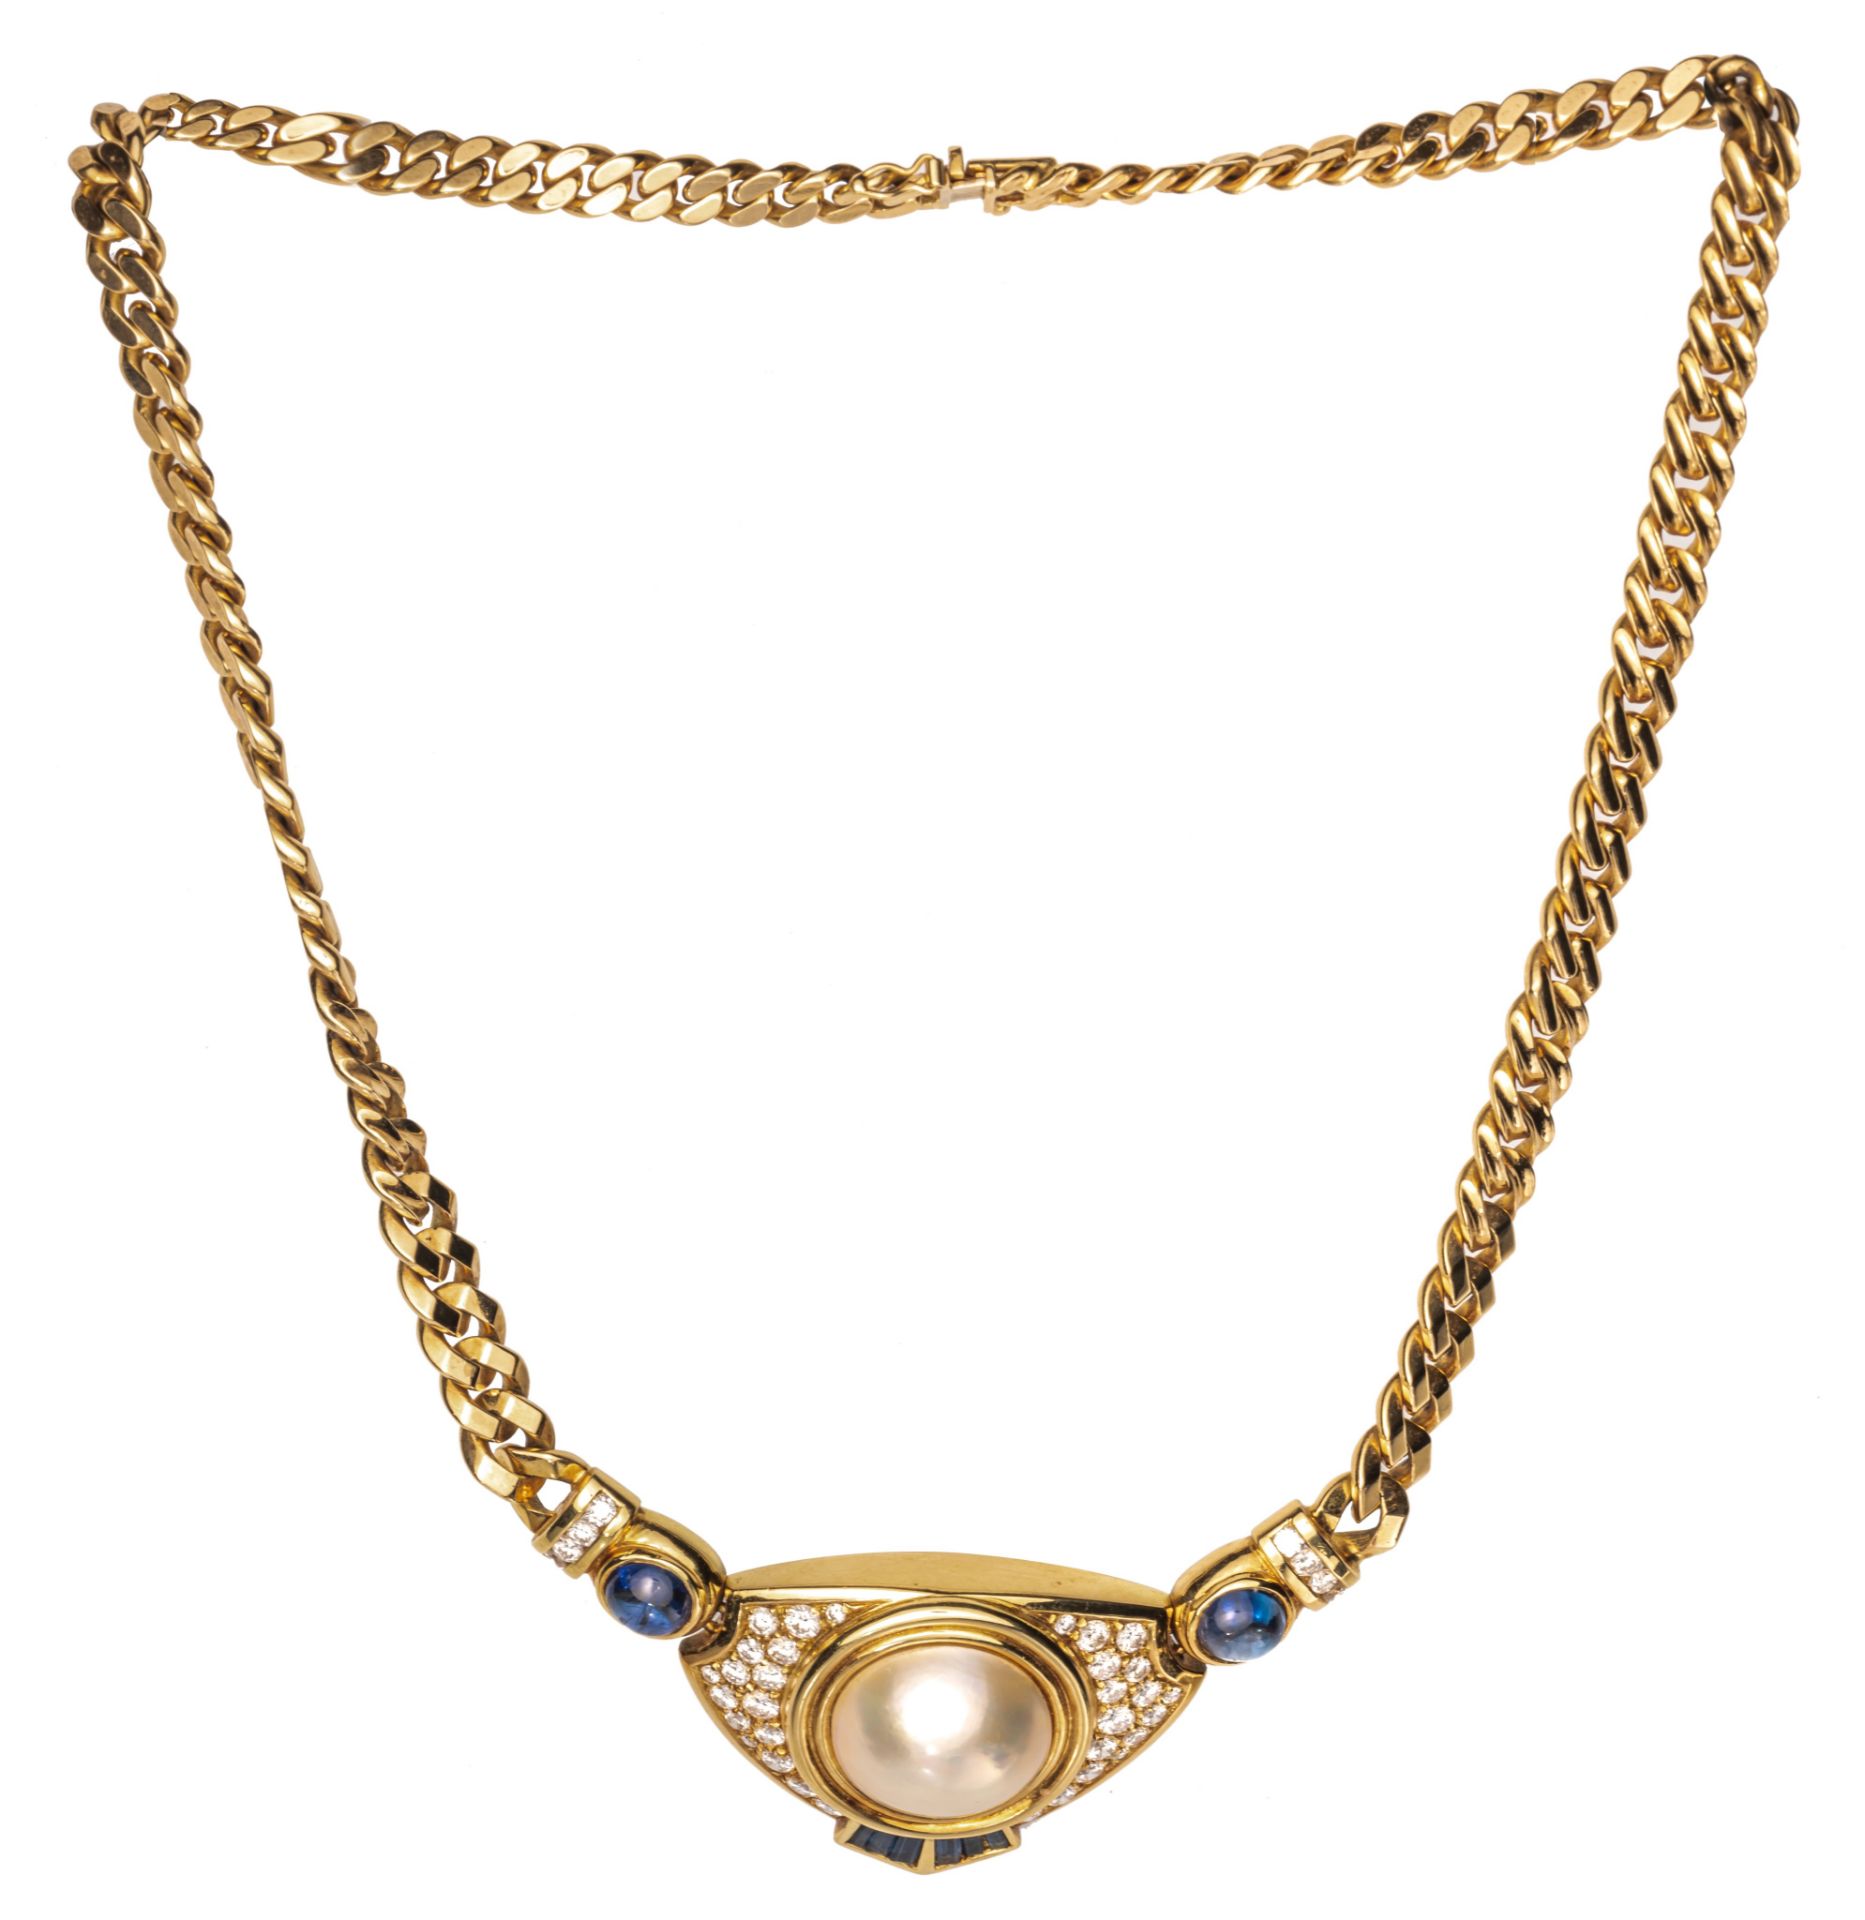 An 18ct yellow gold necklace, set with a mabe pearl, diamonds and blue sapphires, 65 g